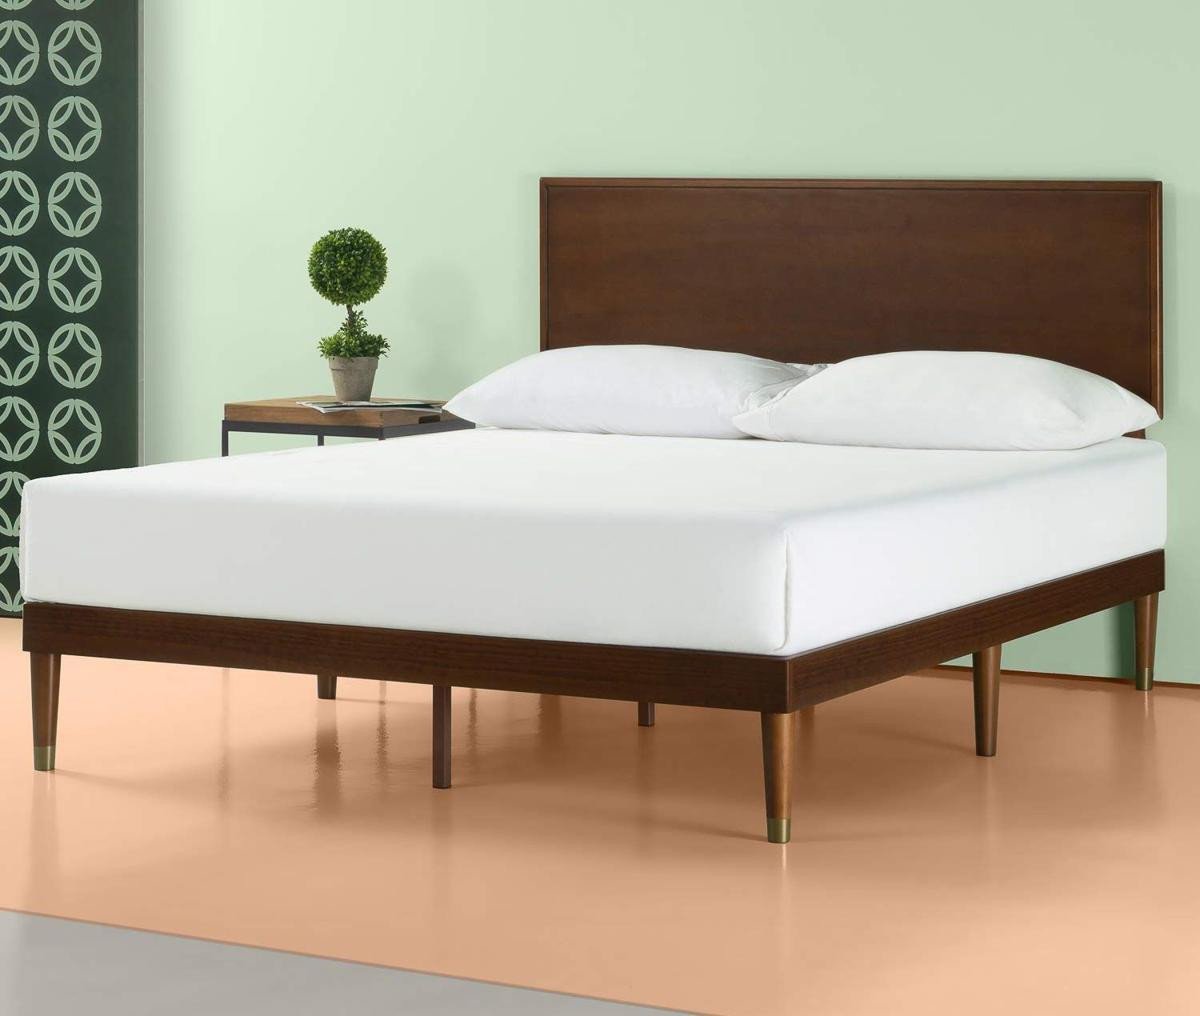 High End Bedroom Furniture Awesome Get A West Elm Look for Under $300 with This Mid Century Bed